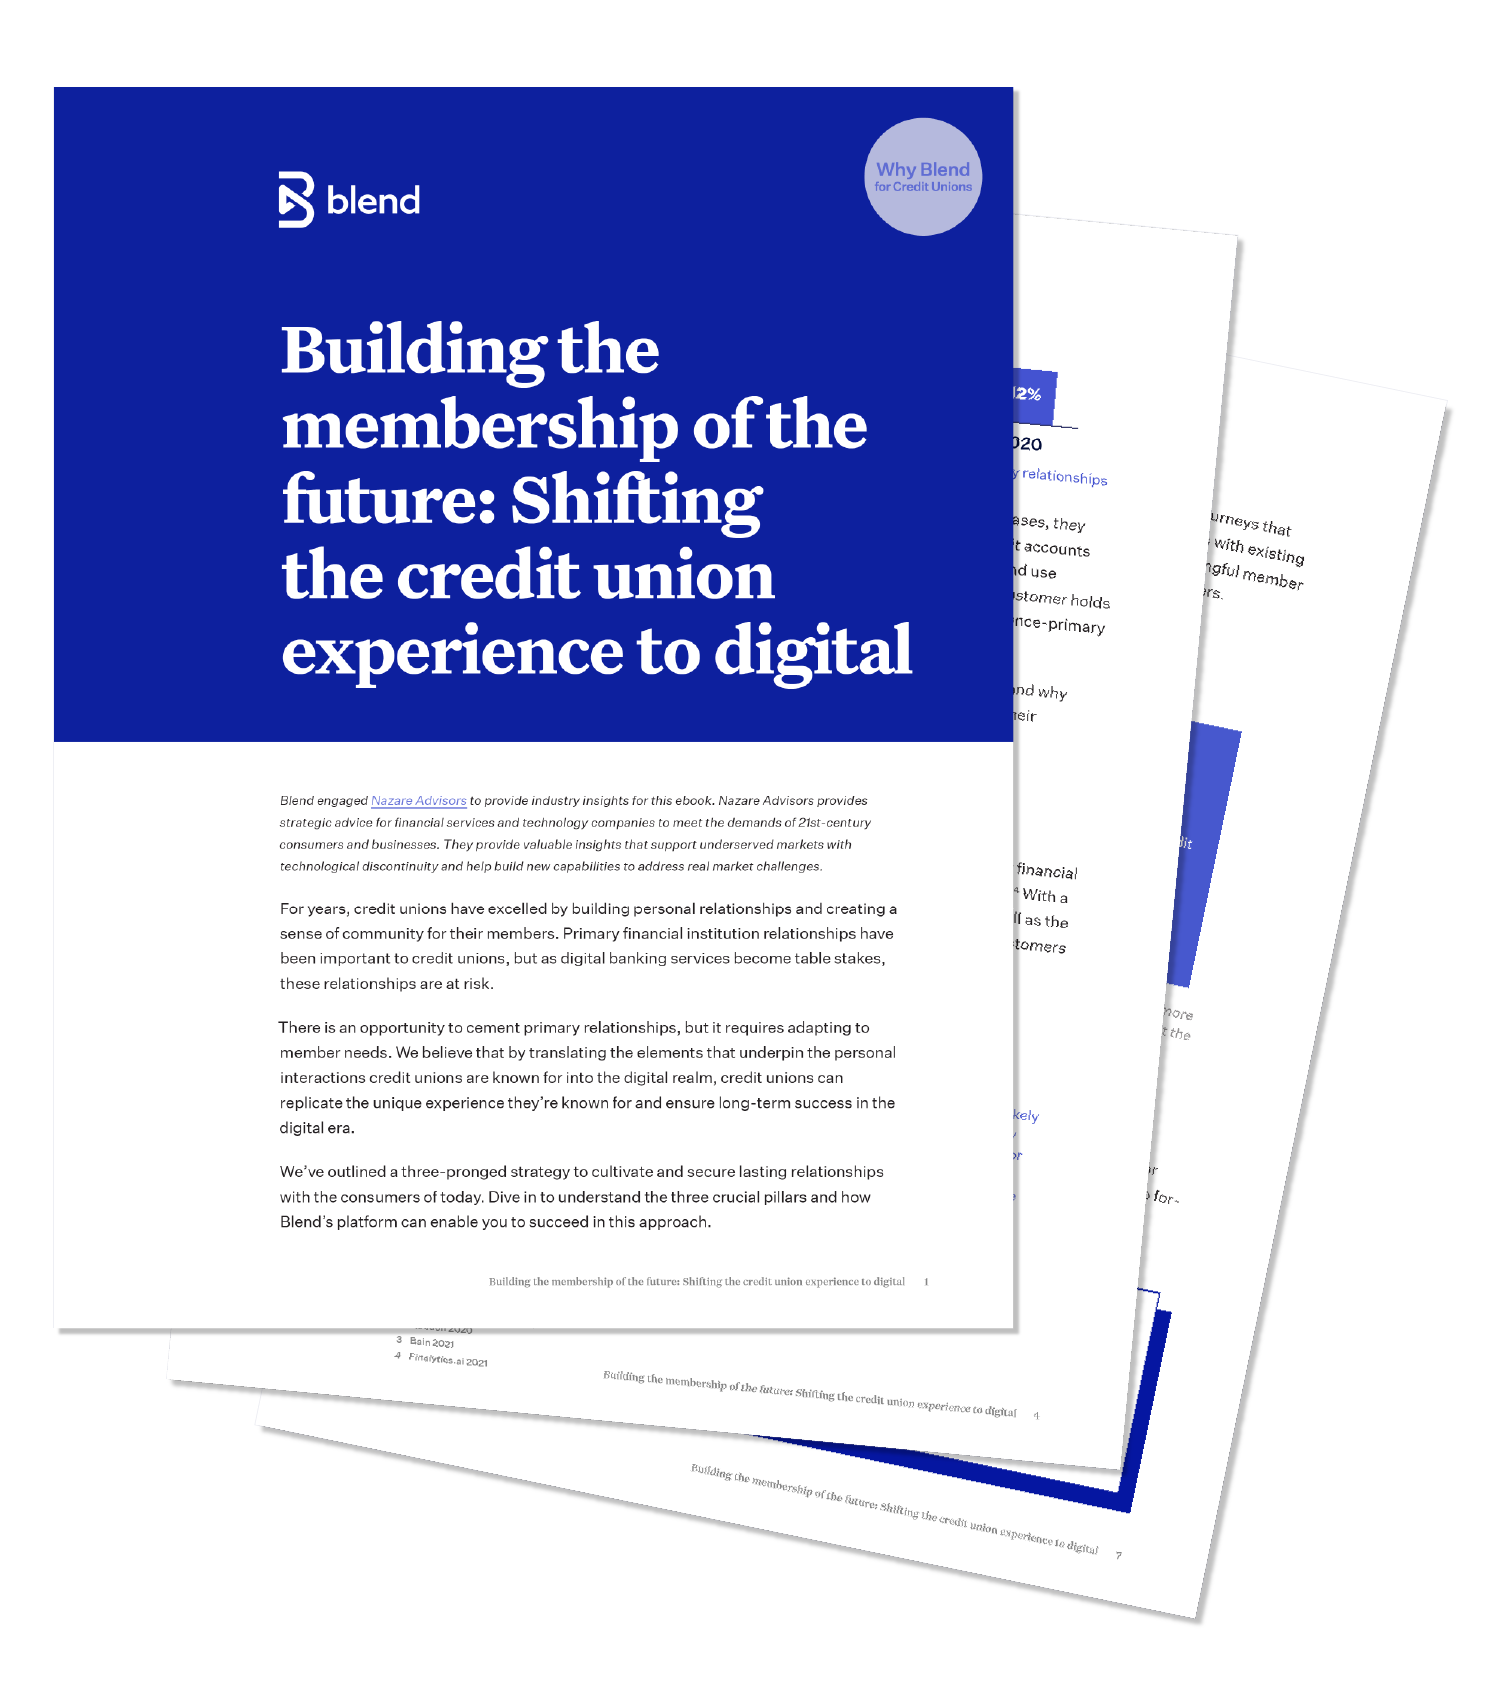 A Blend ebook titled Building the membership of the future: Shifting the credit union experience to digital.